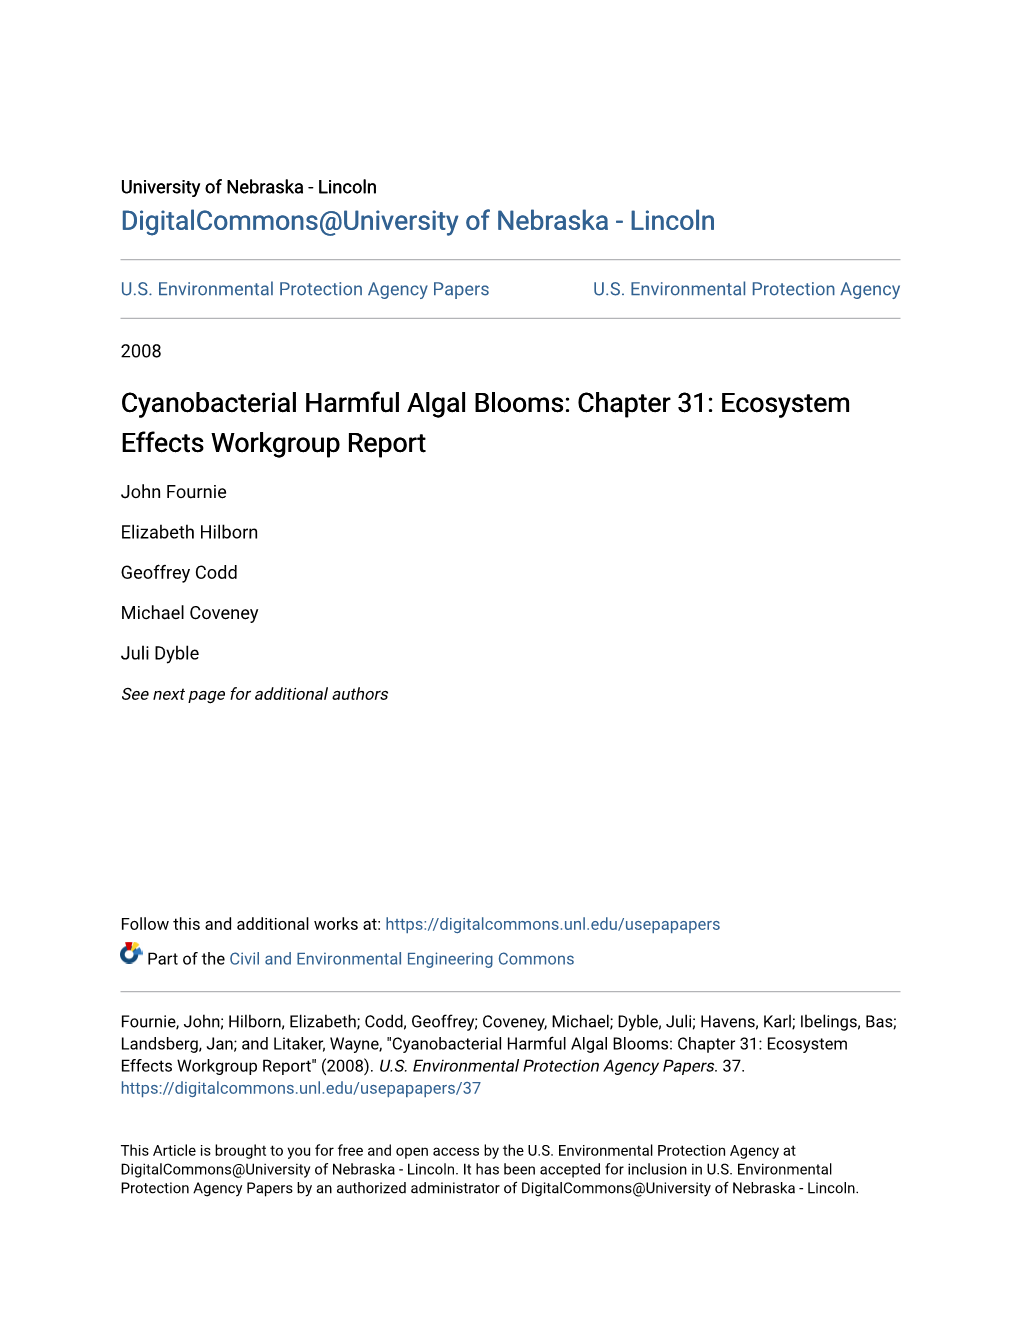 Cyanobacterial Harmful Algal Blooms: Chapter 31: Ecosystem Effects Workgroup Report